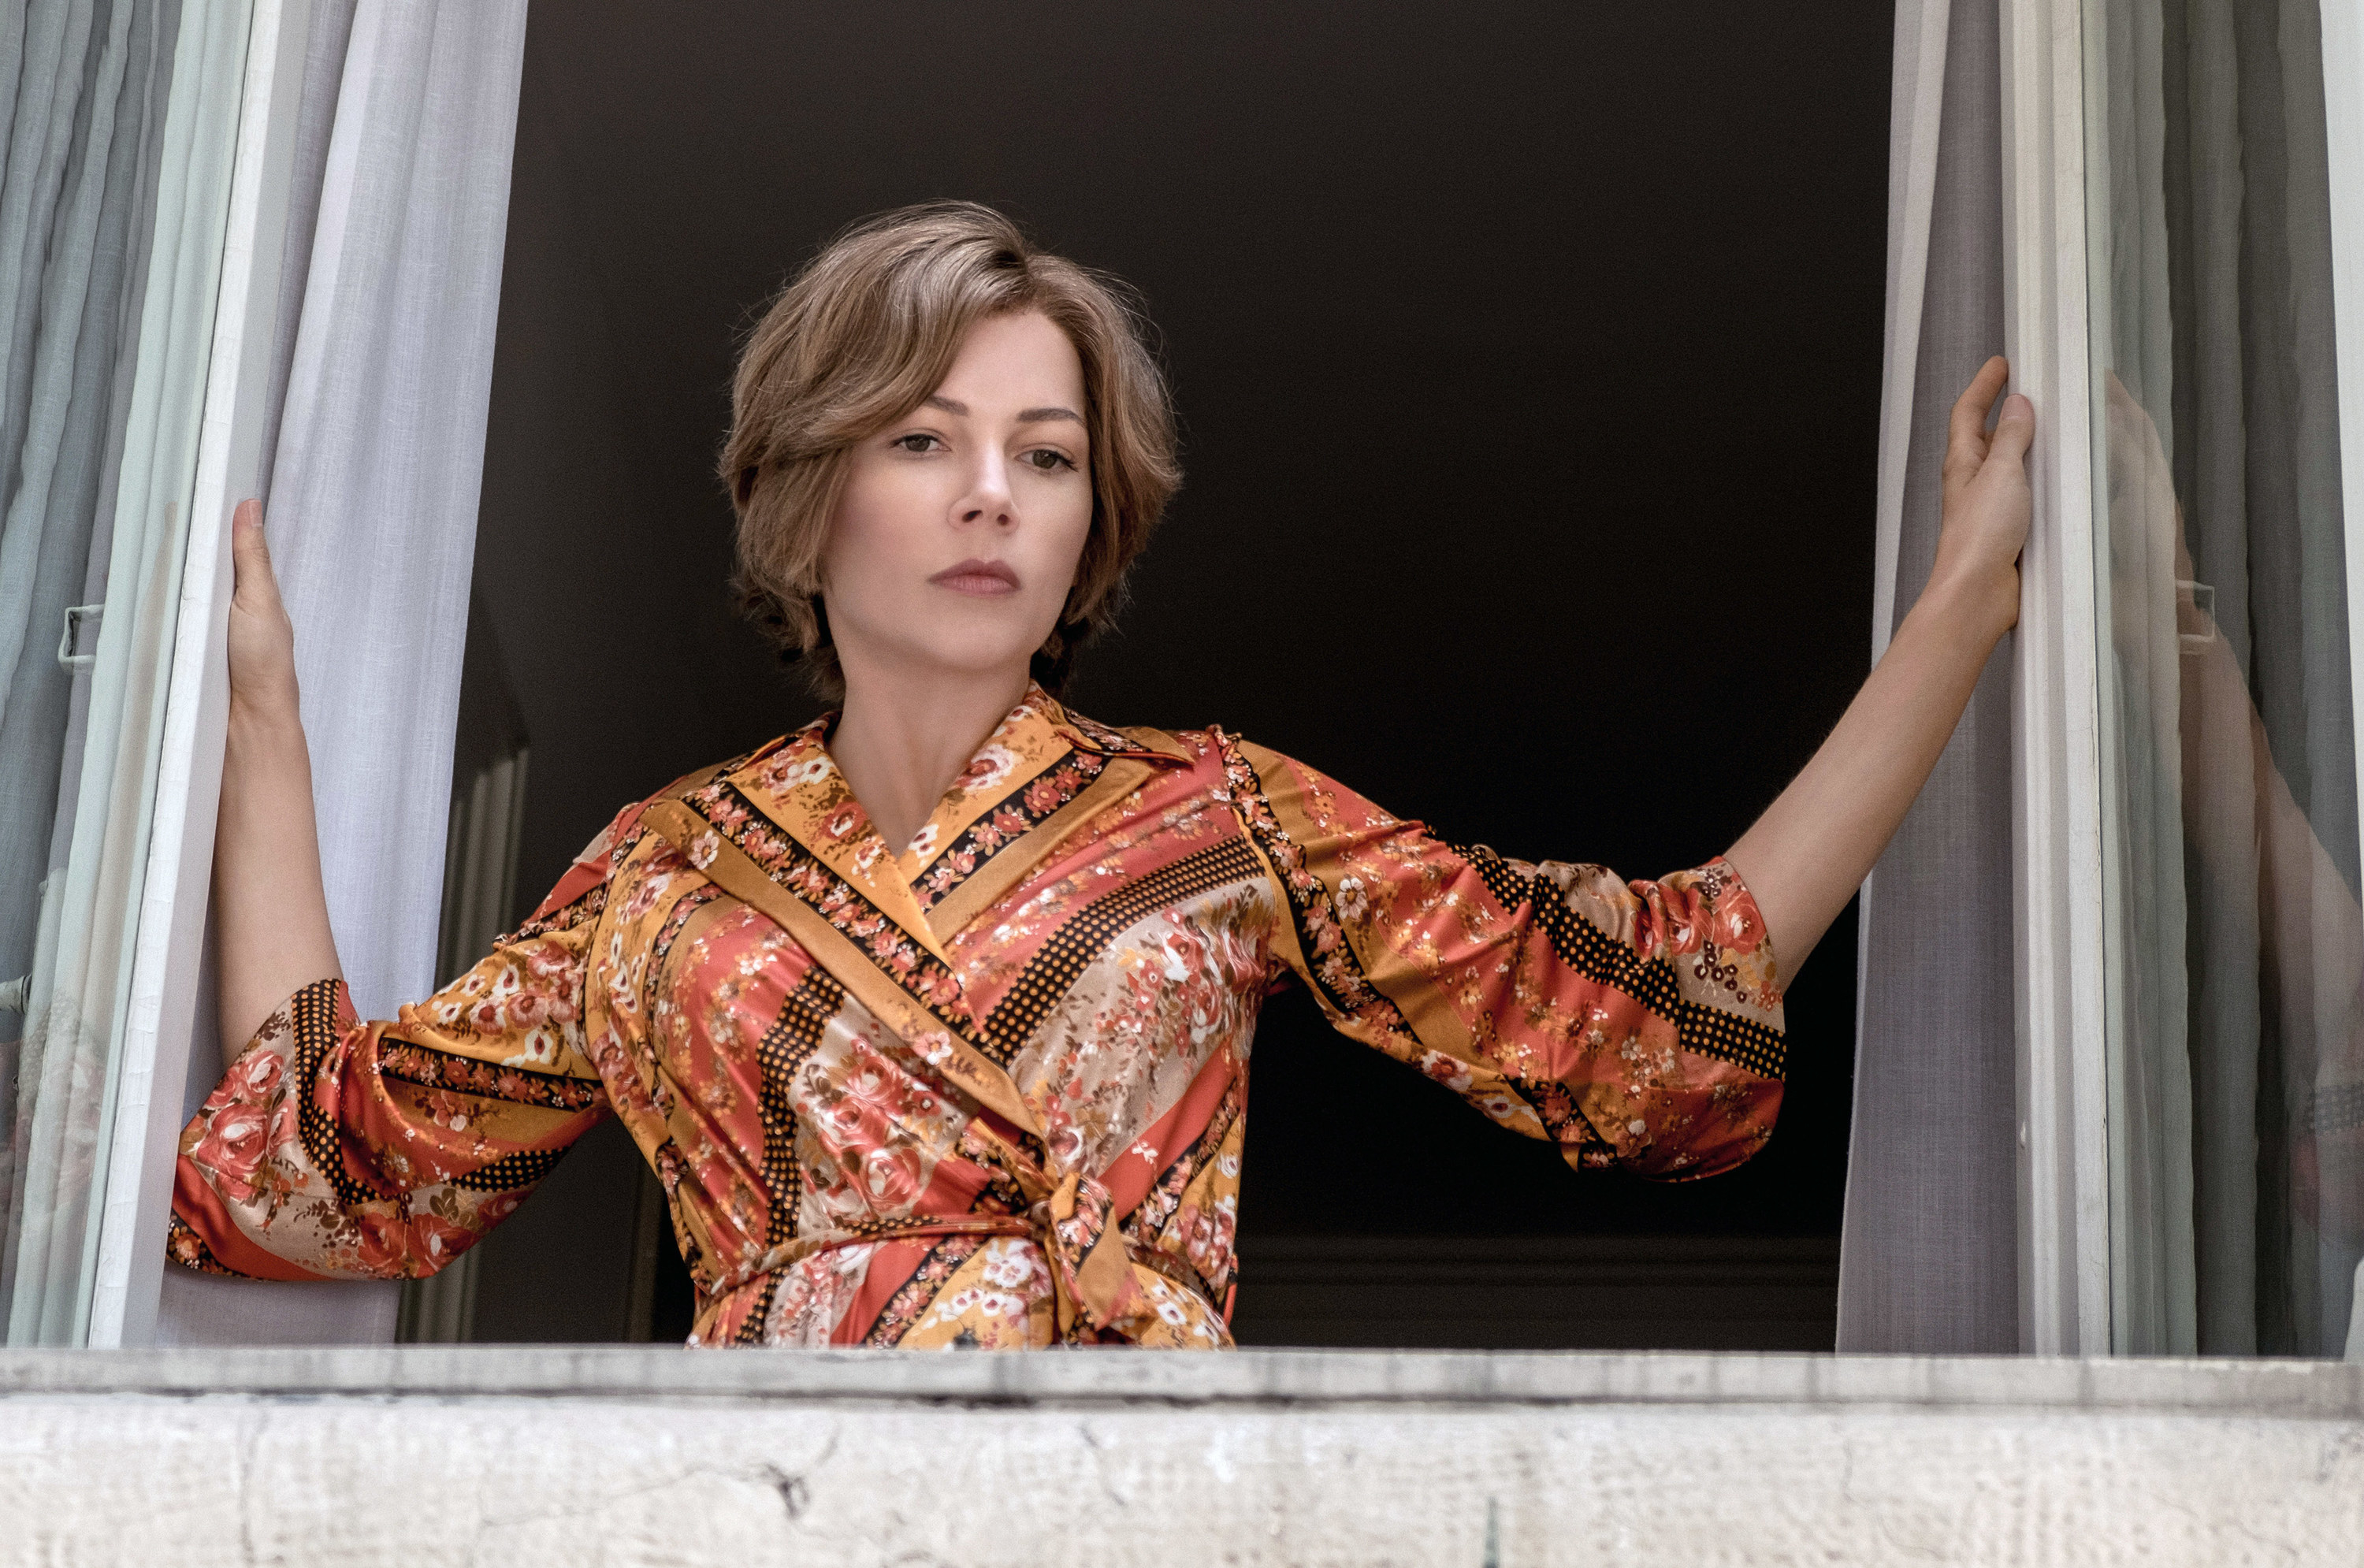 wearing an intricately patterned robe, Gail pushes open the curtains and looks down onto the street